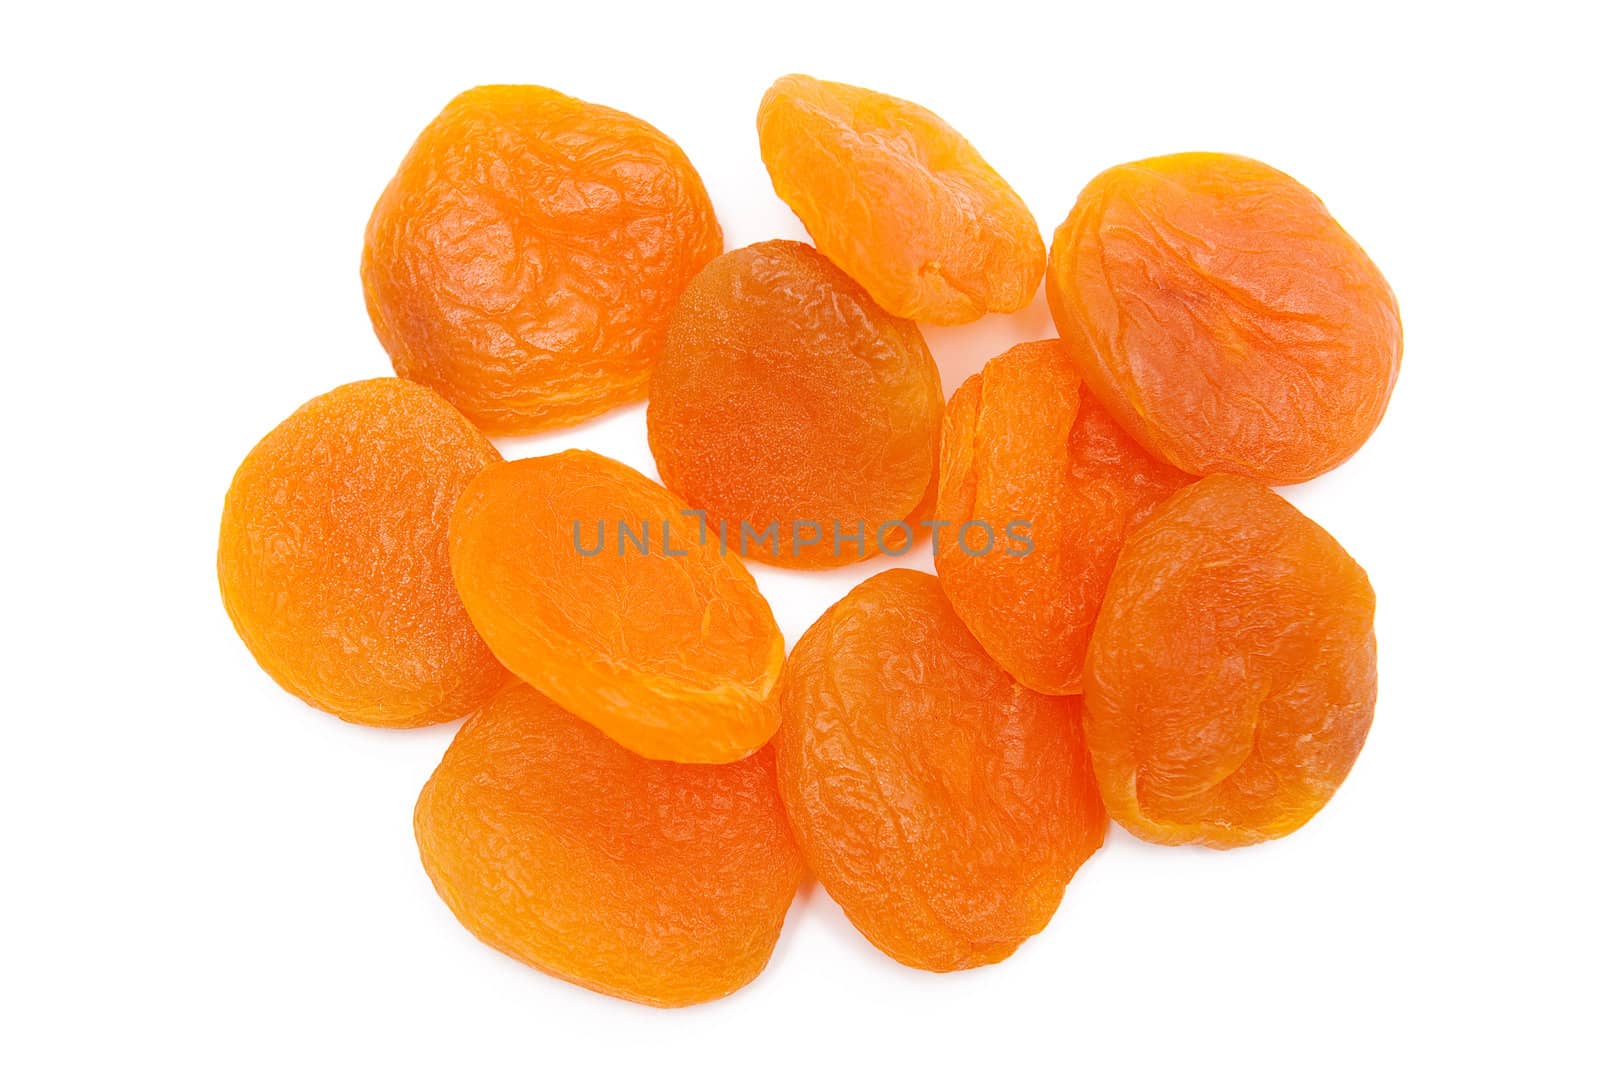 Dried apricots on the white background